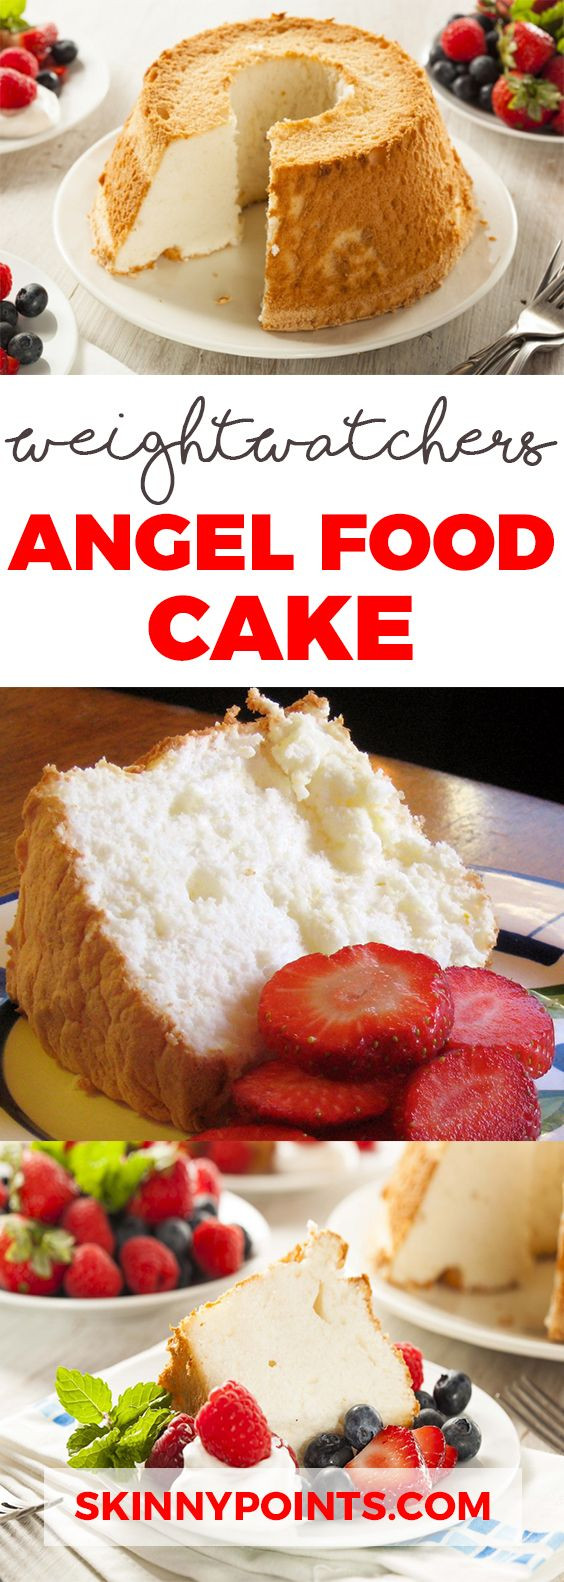 Weight Watchers Angel Food Cake Recipes
 1000 images about Weight watchers on Pinterest